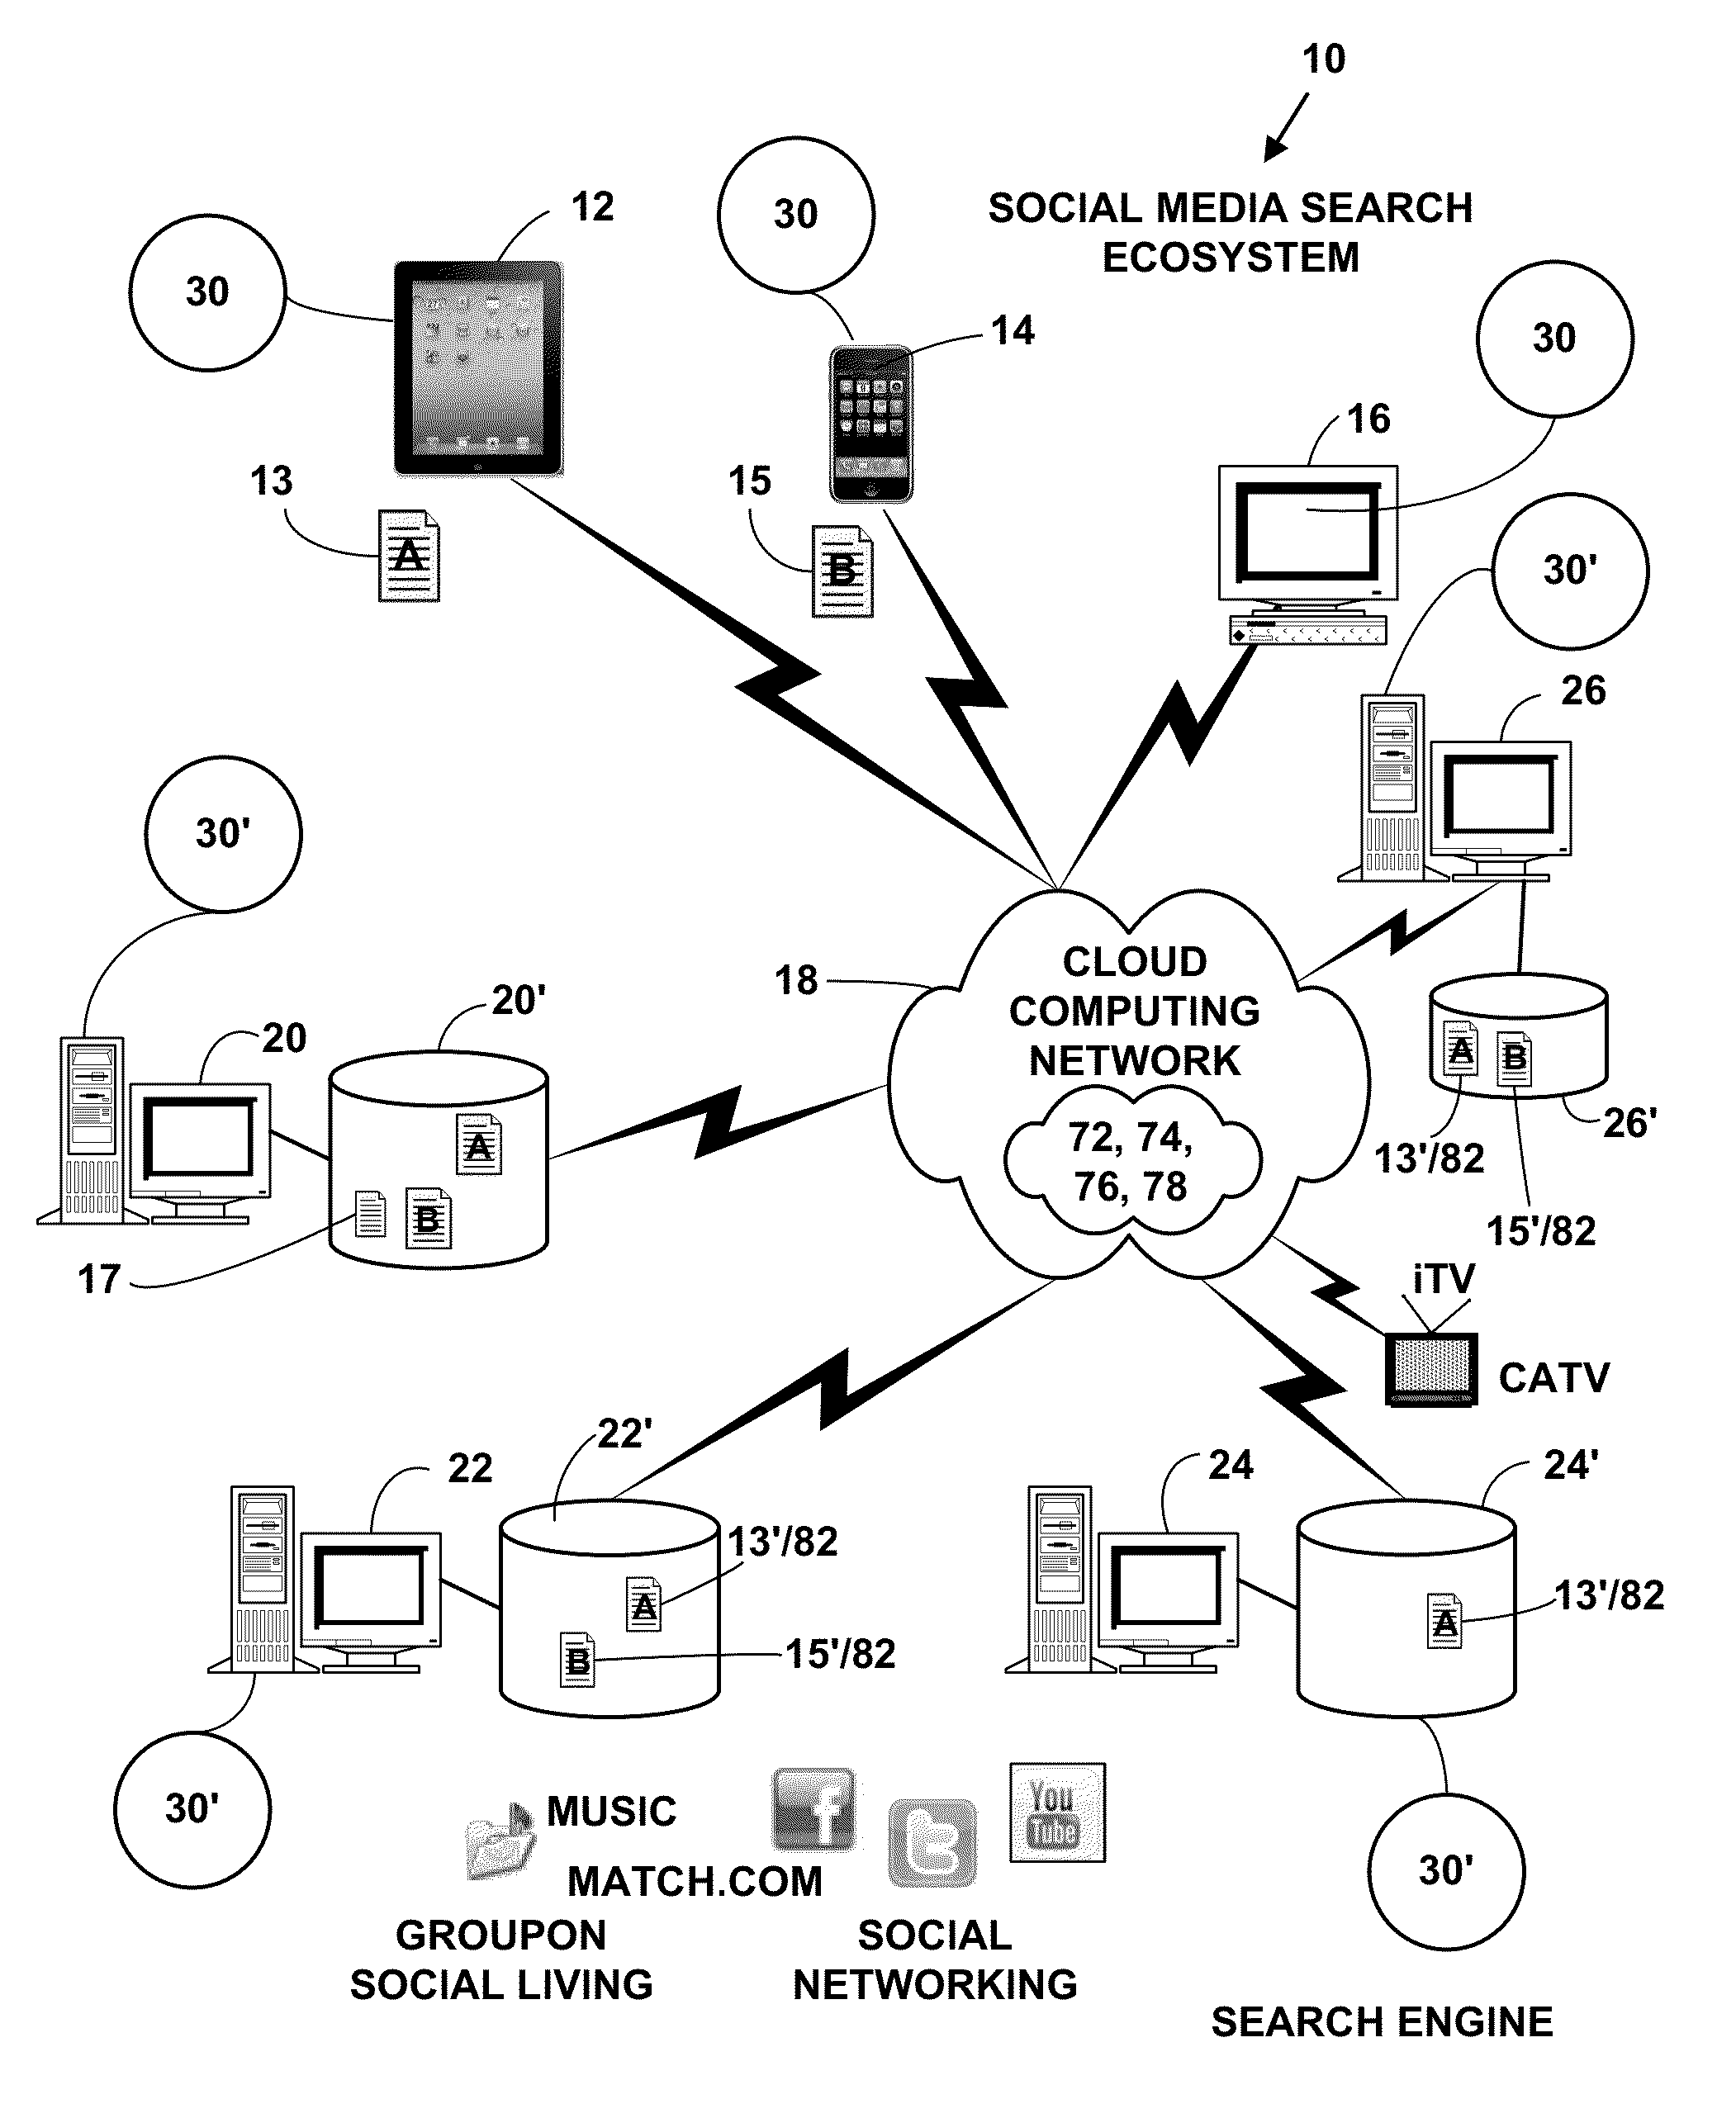 Method and system for providing search serivces for a social media ecosystem